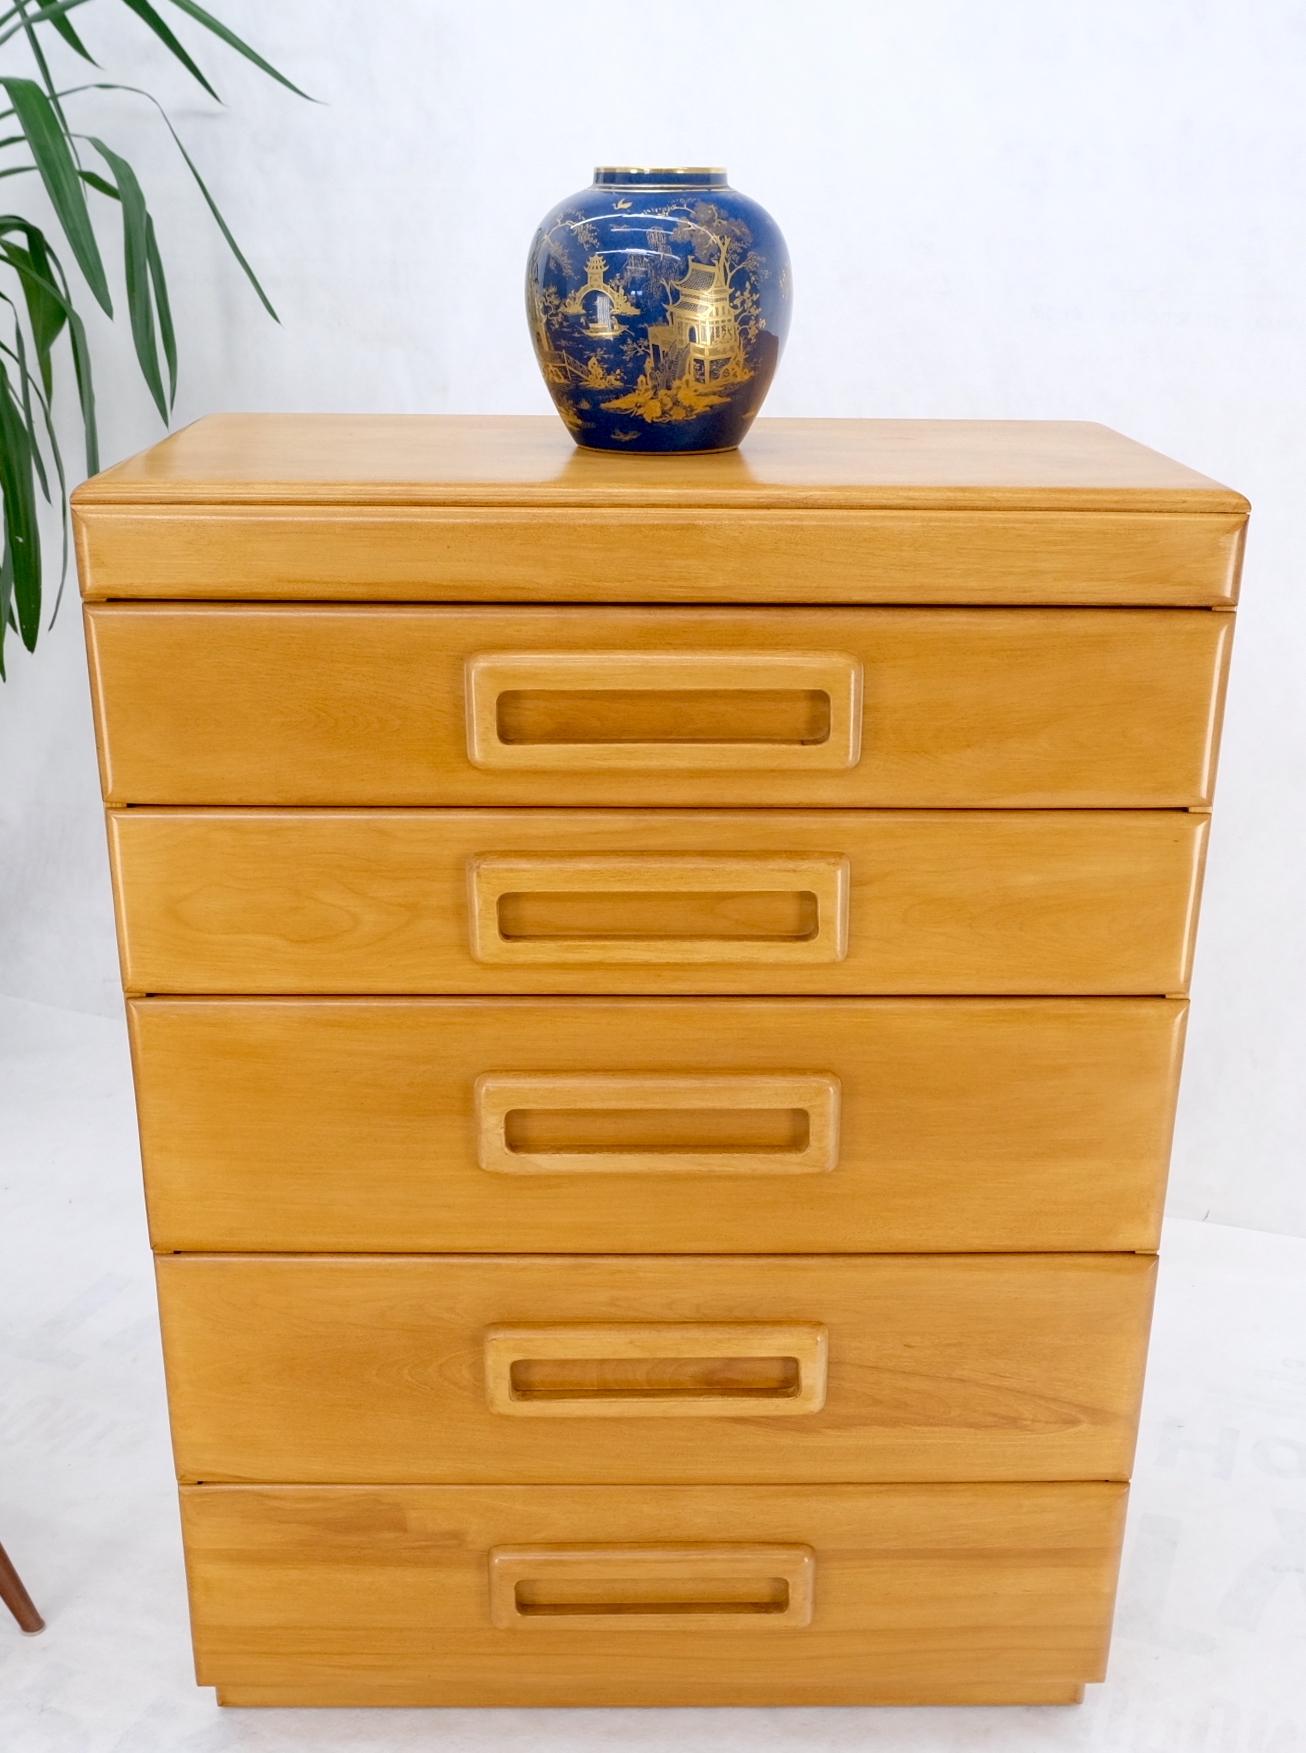 Russel Wright Conant Ball Mid-Century Modern Solid Birch High Chest Dresser Mint For Sale 9